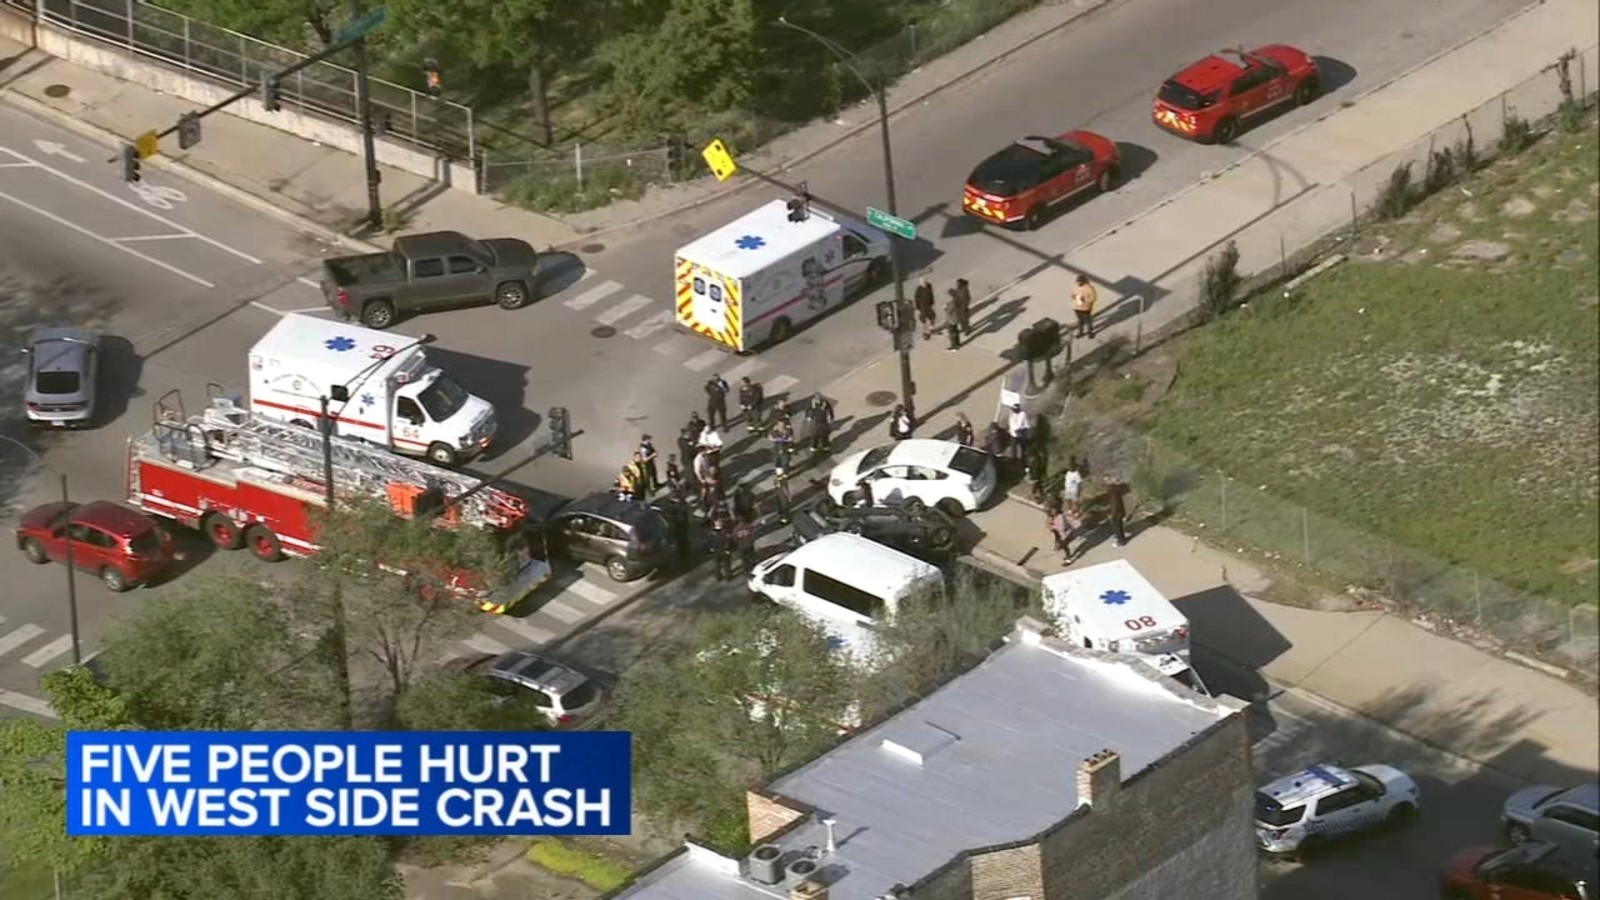 At least 5 injured in Lawndale car crash, Chicago fire officials say